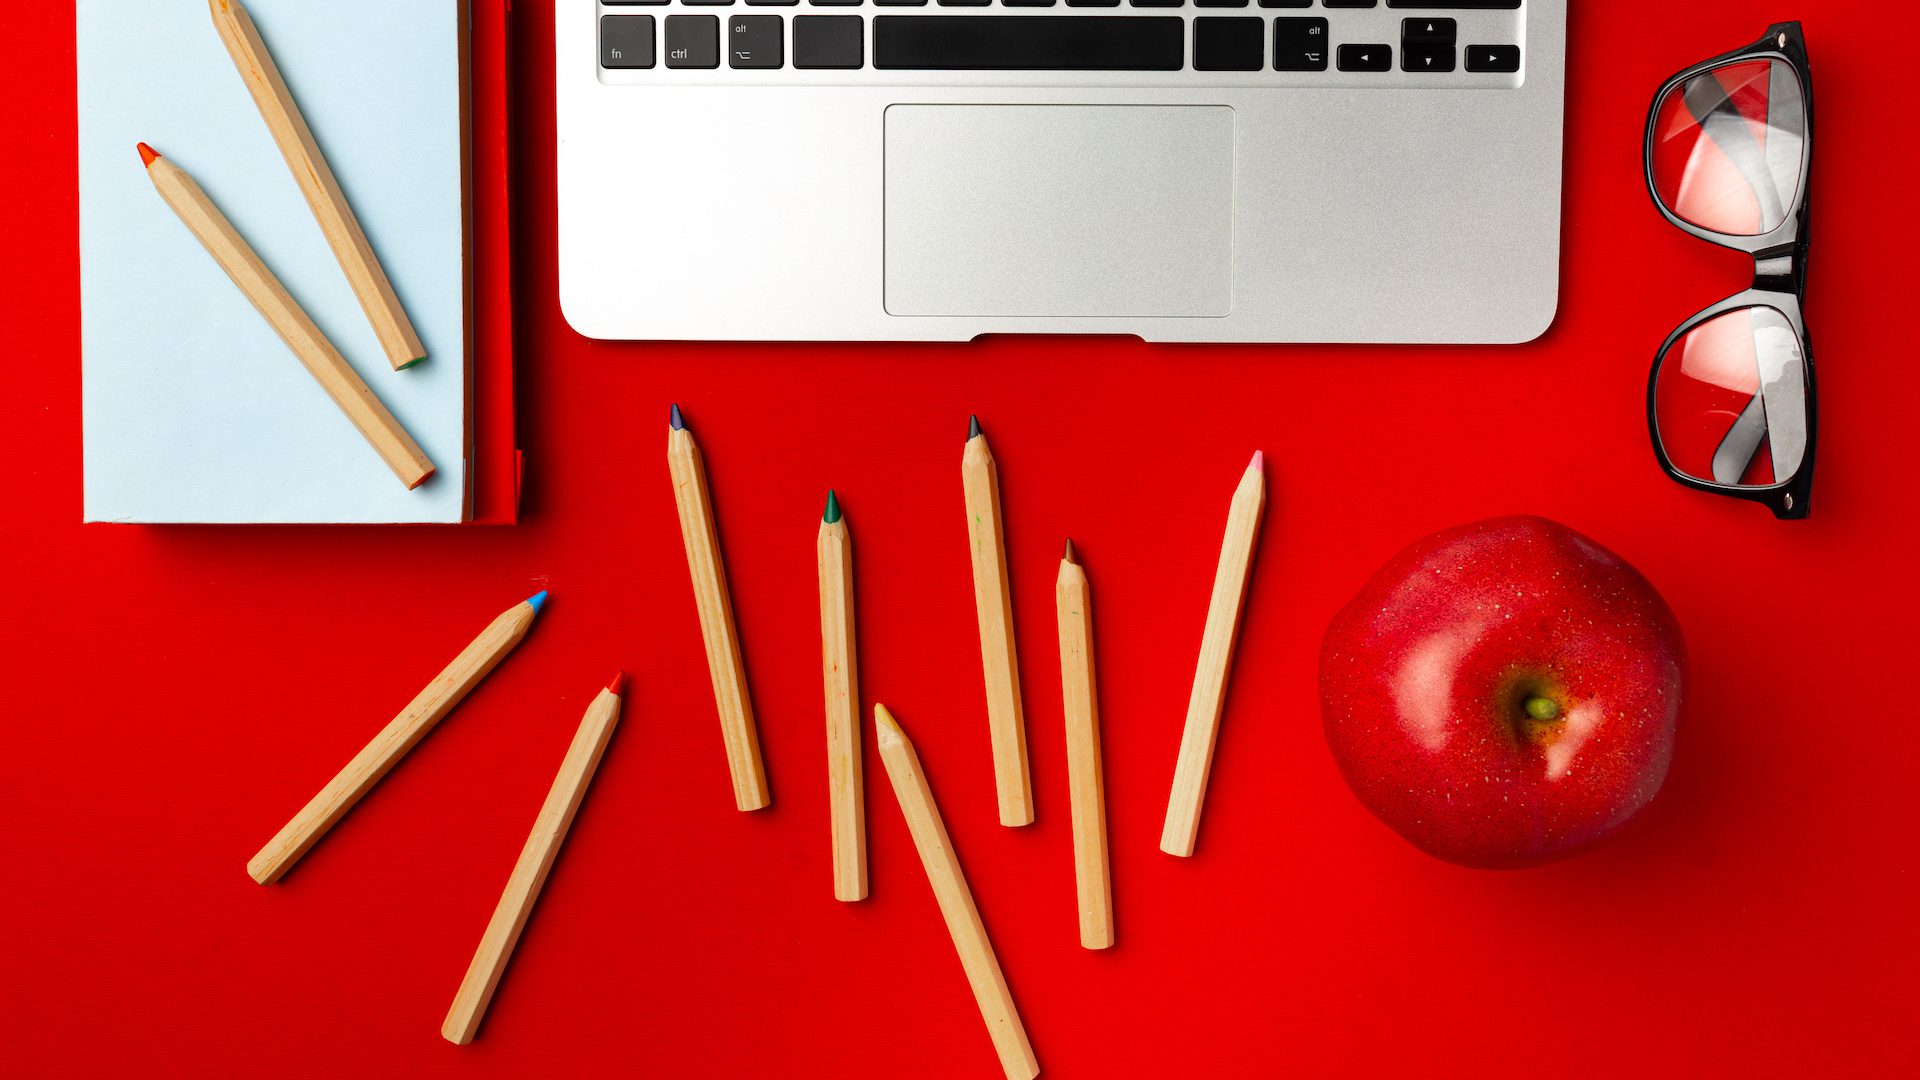 Top view of student working space with open laptop and red apple, other supplies